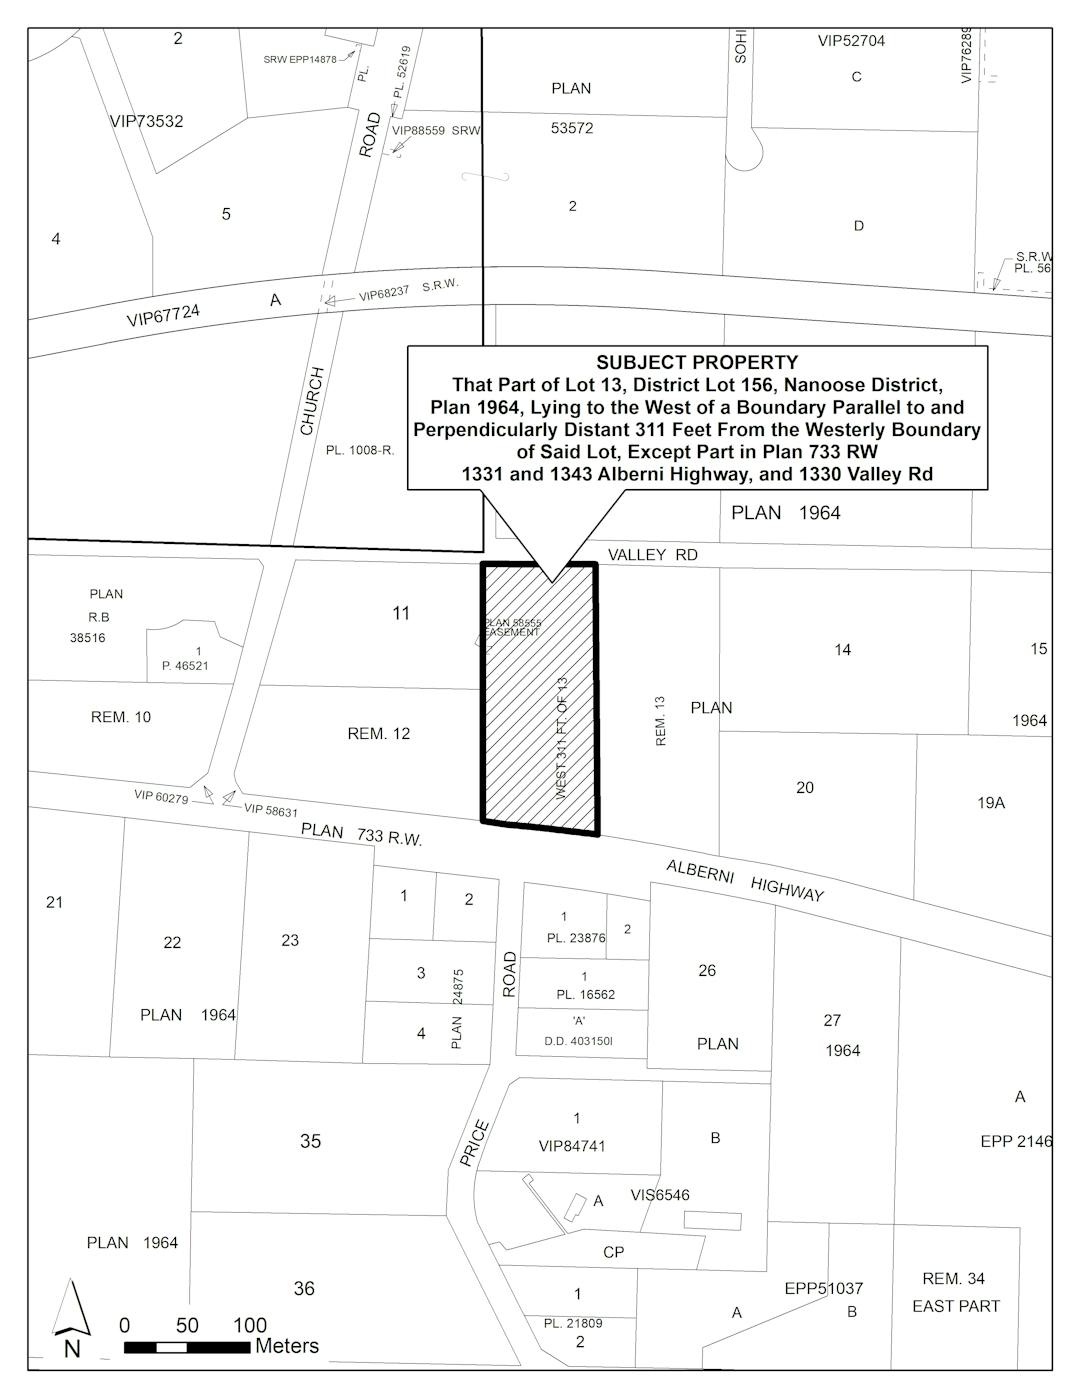 The RDN is currently looking for your input on zoning amendment application PL2019-051.